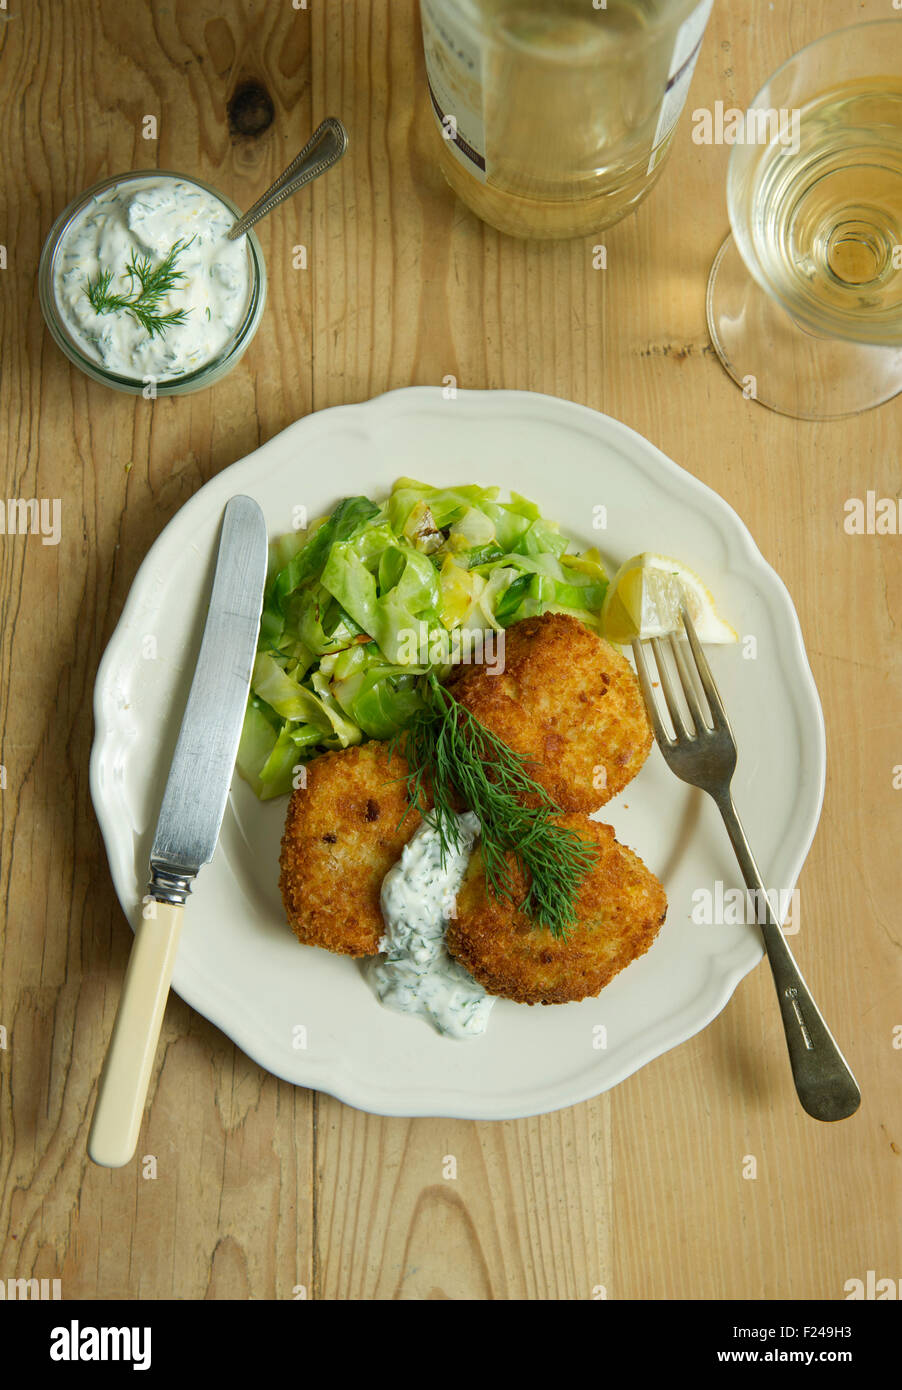 Spiced fishcakes with spring cabbage and tartare sauce. a UK meal cuisine seafood fish meal meals dish small plate eat eating Stock Photo